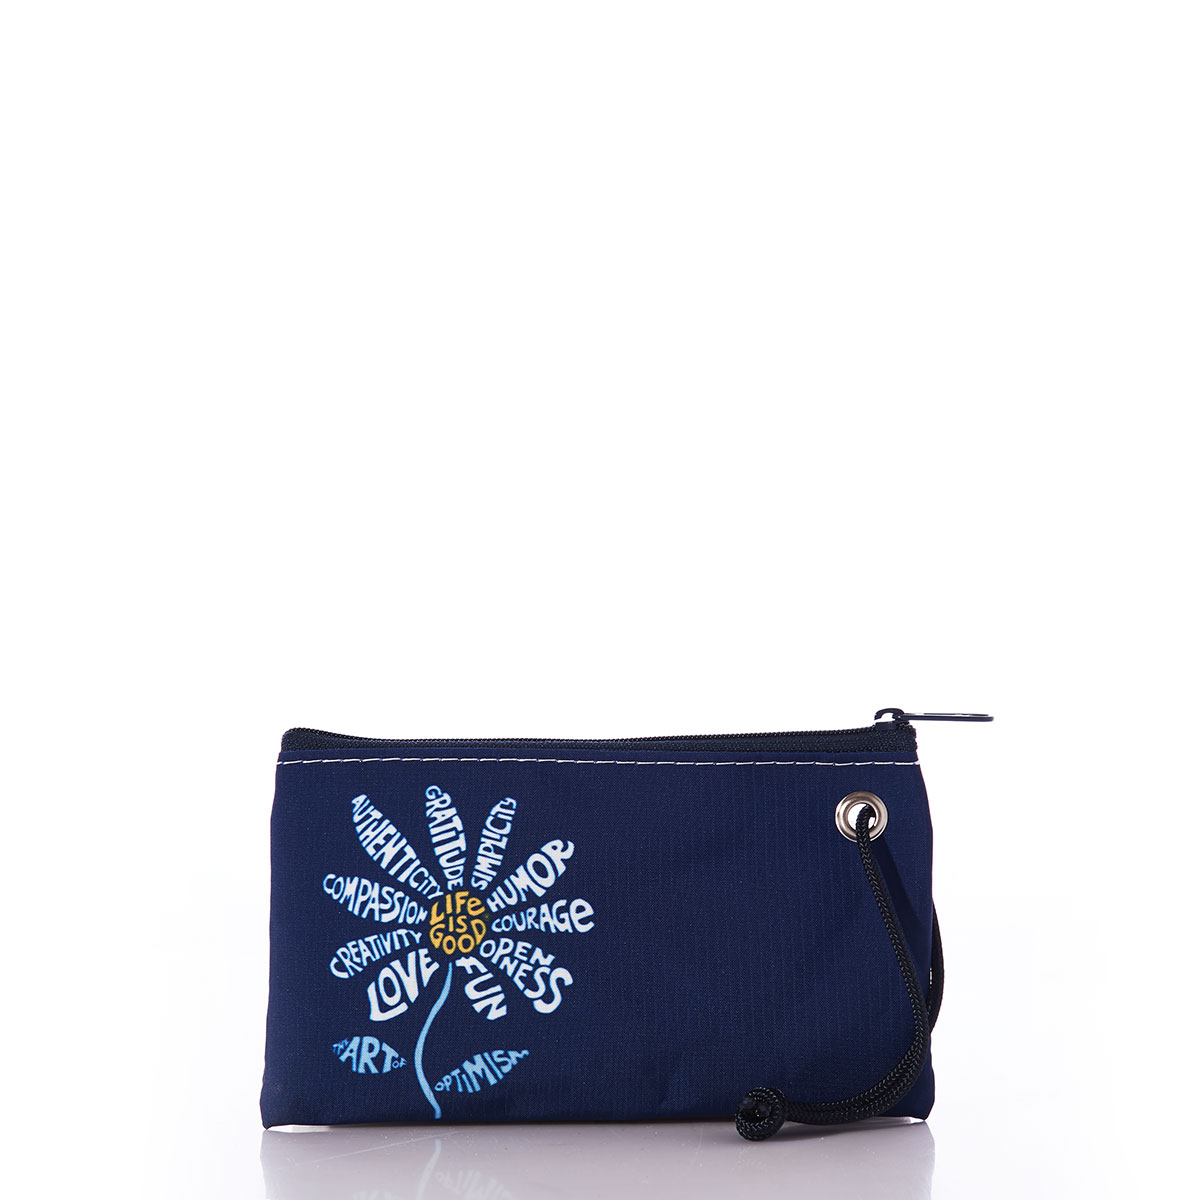 Superpower Daisy Life is Good Wristlet